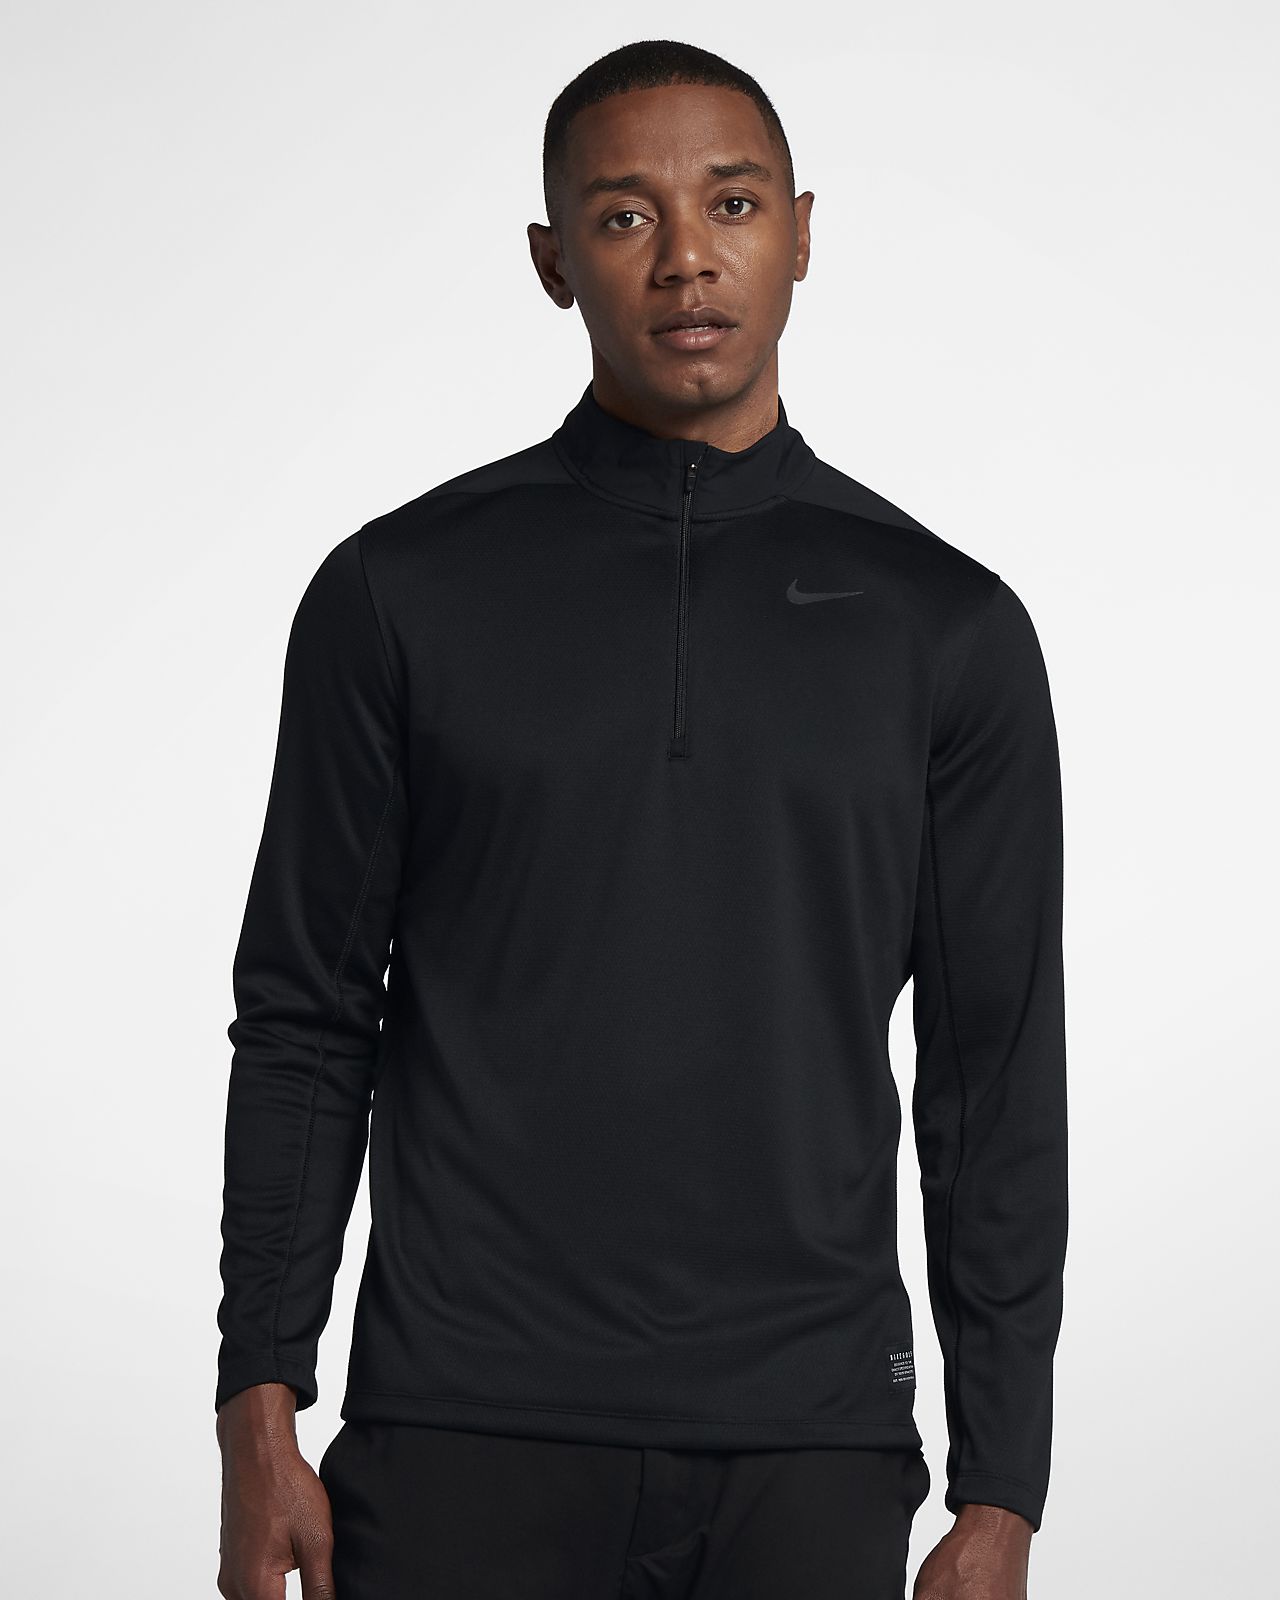 Take - nike dry fit - 61% off for All 